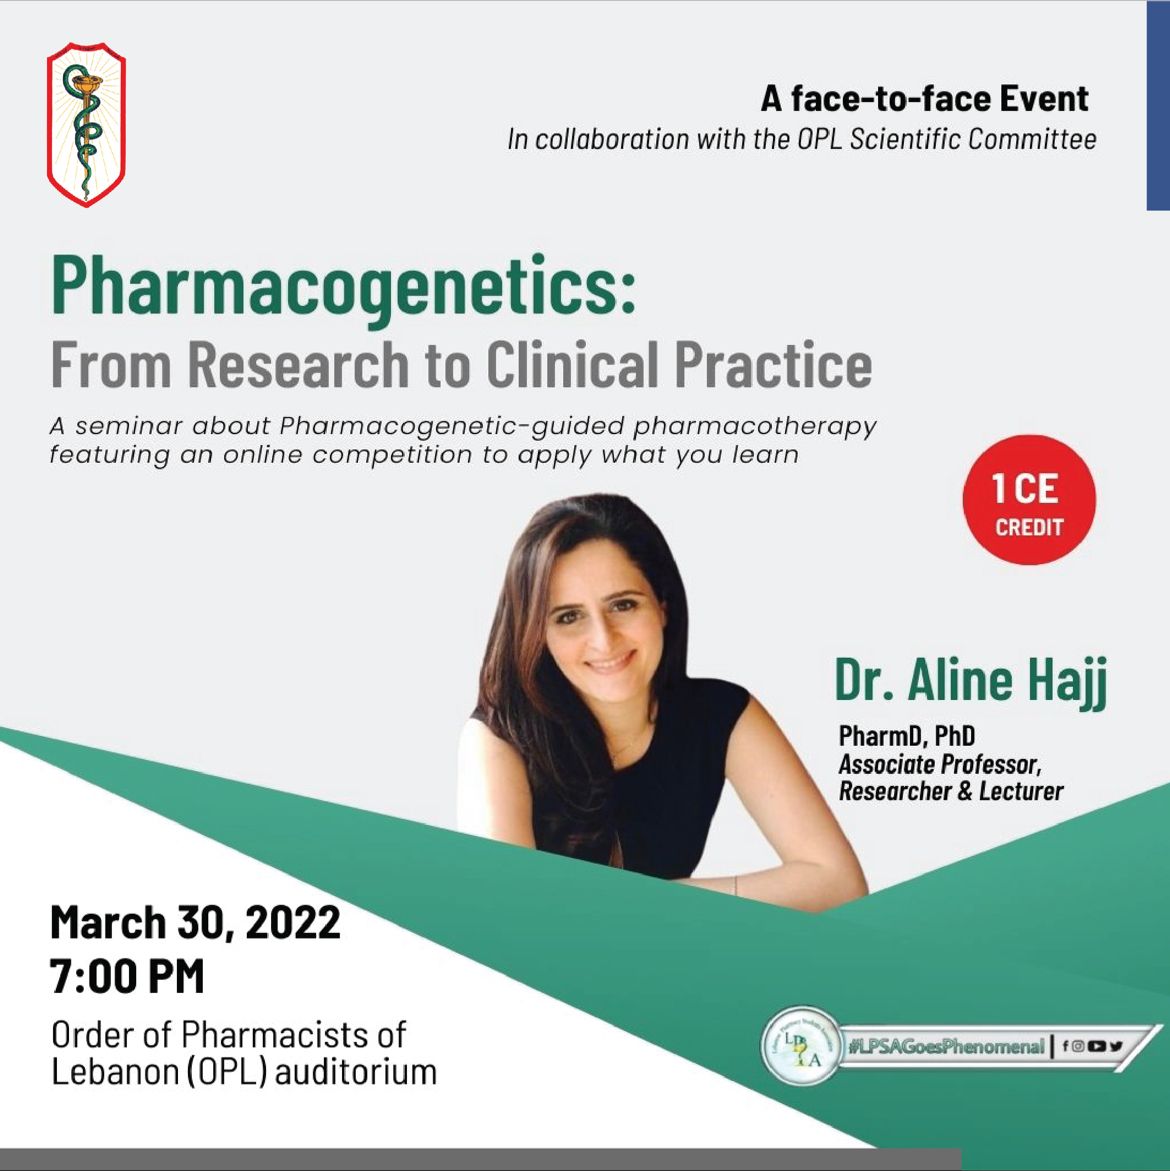 Join us LIVE on Wednesday, March 30, 2022, at 7 pm sharp to learn all about #Pharmacogenetics with Dr. Aline Hajj!! #conference #livemeeting #orderofpharmacistsoflebanon #oplscientificcommittee #oplcommunicationcommittee #pharmacists